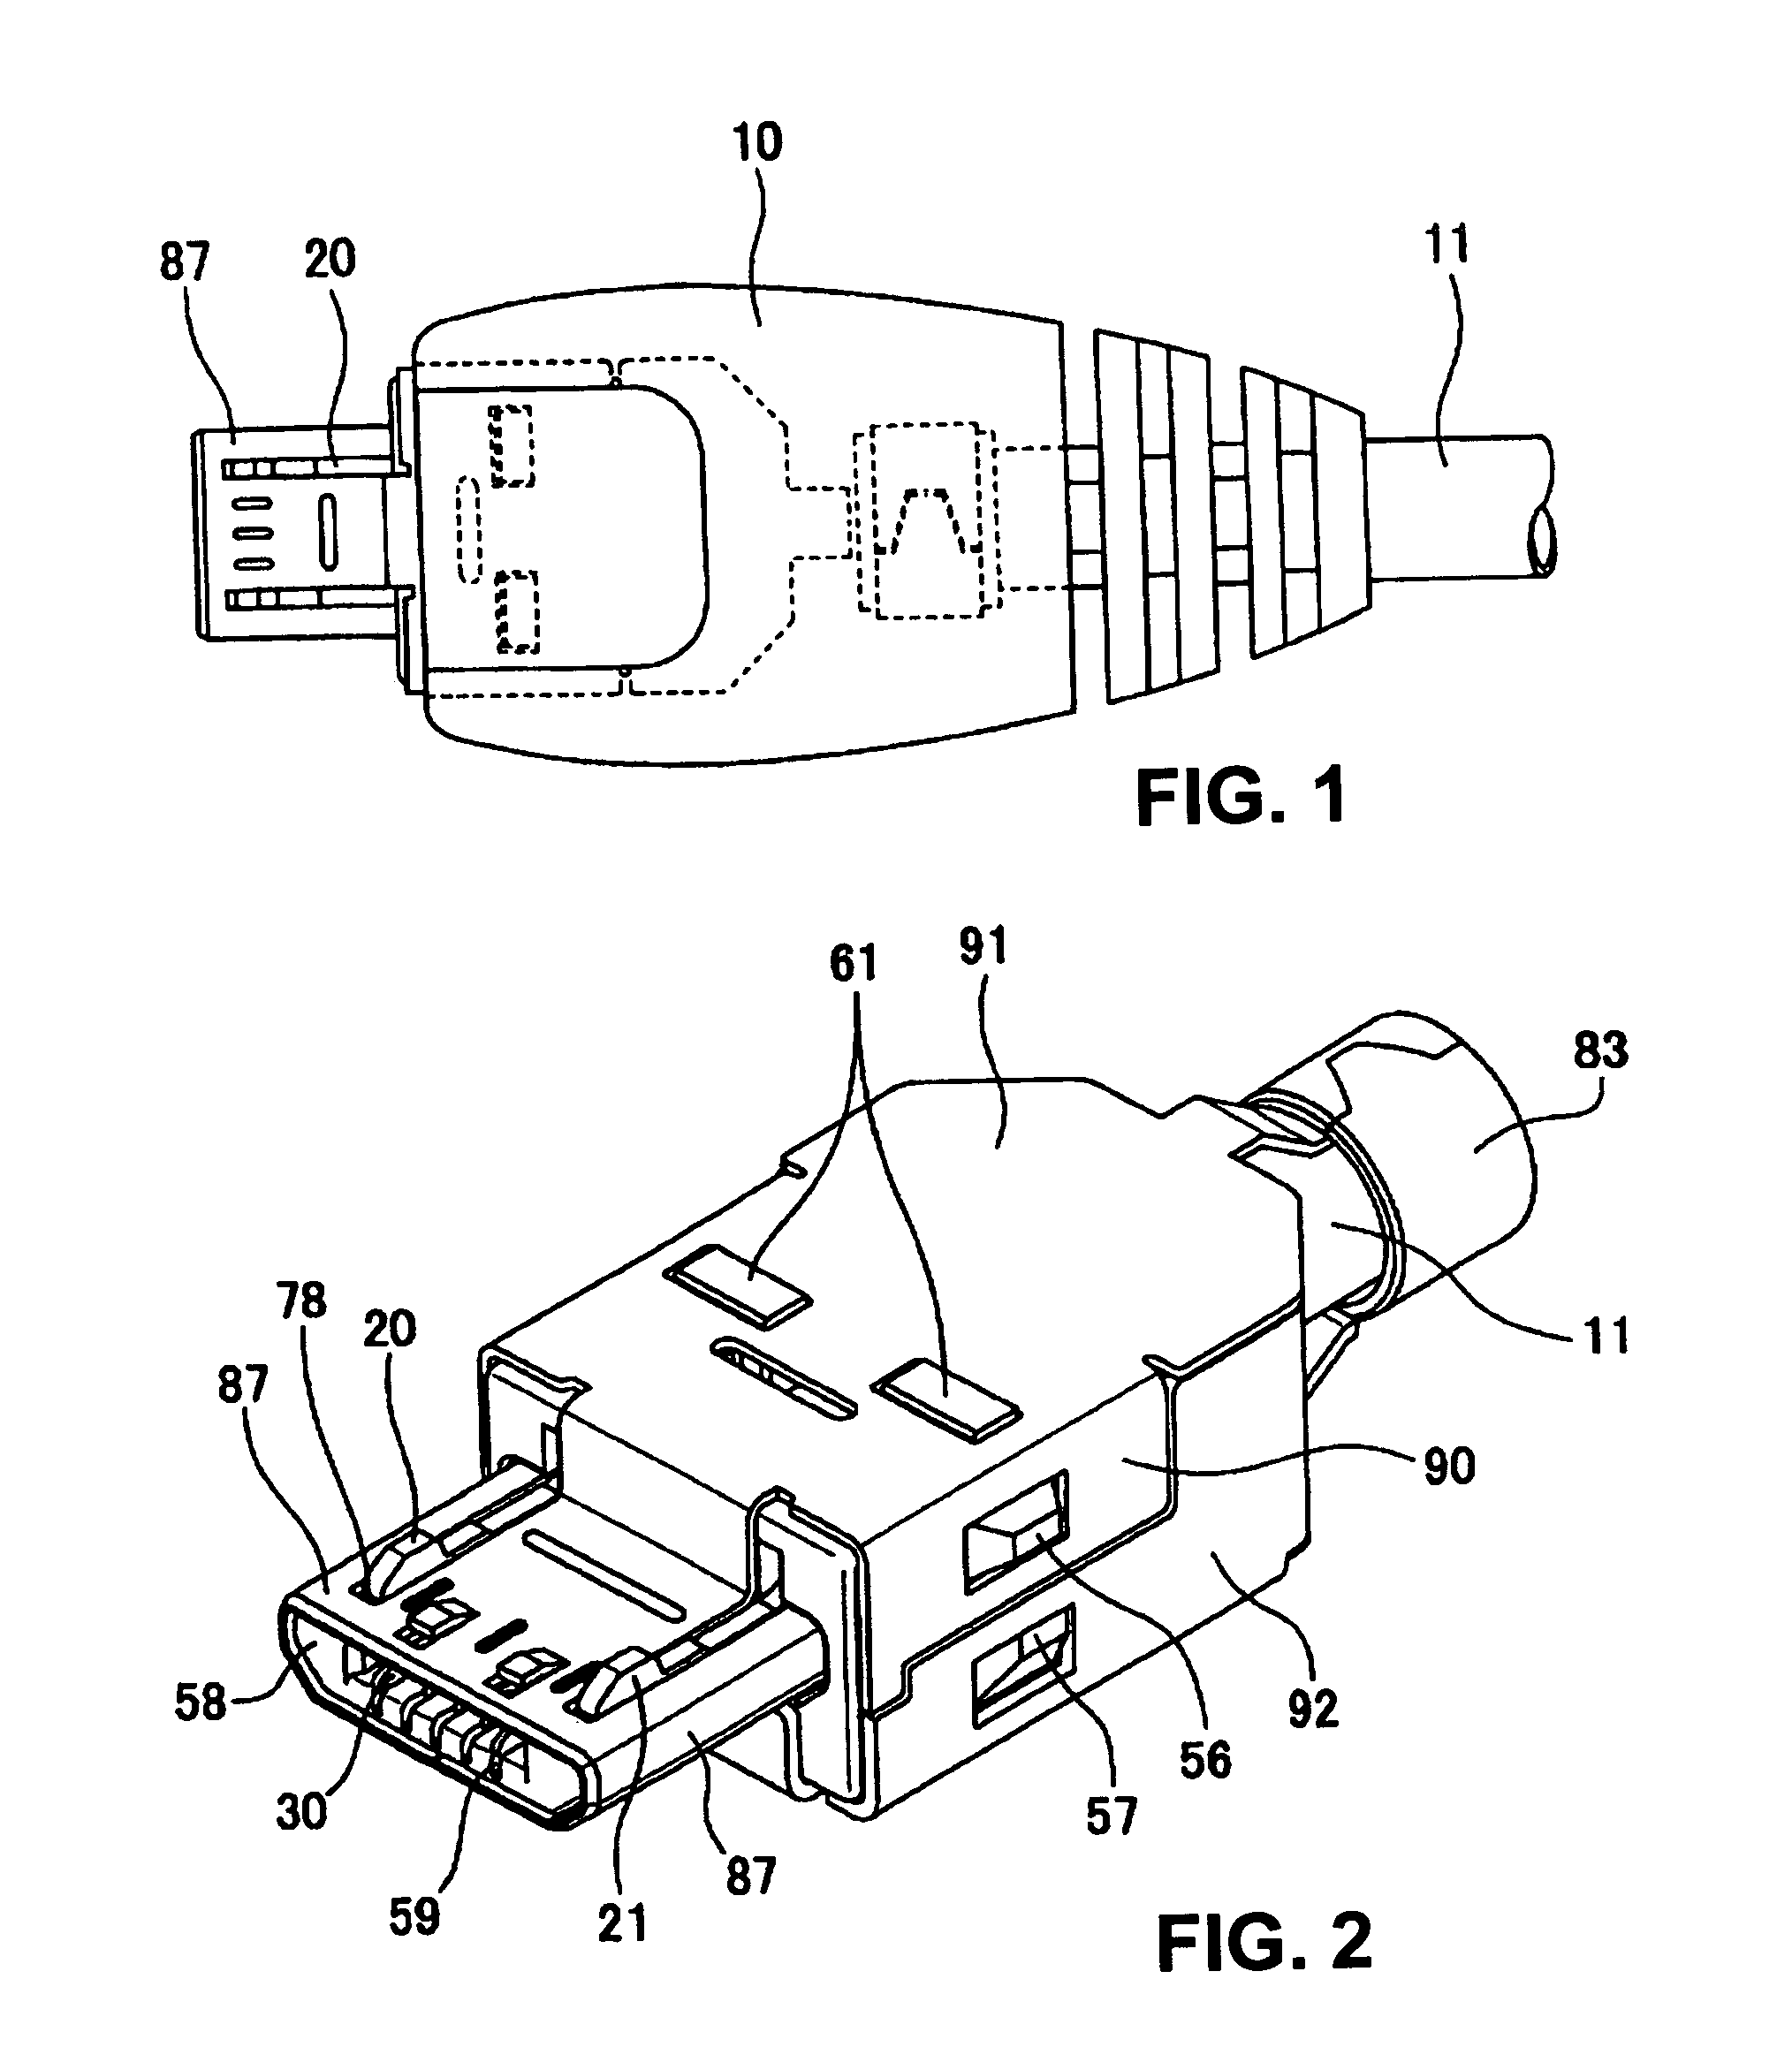 Electrical connector having terminals arranged with narrow pitch